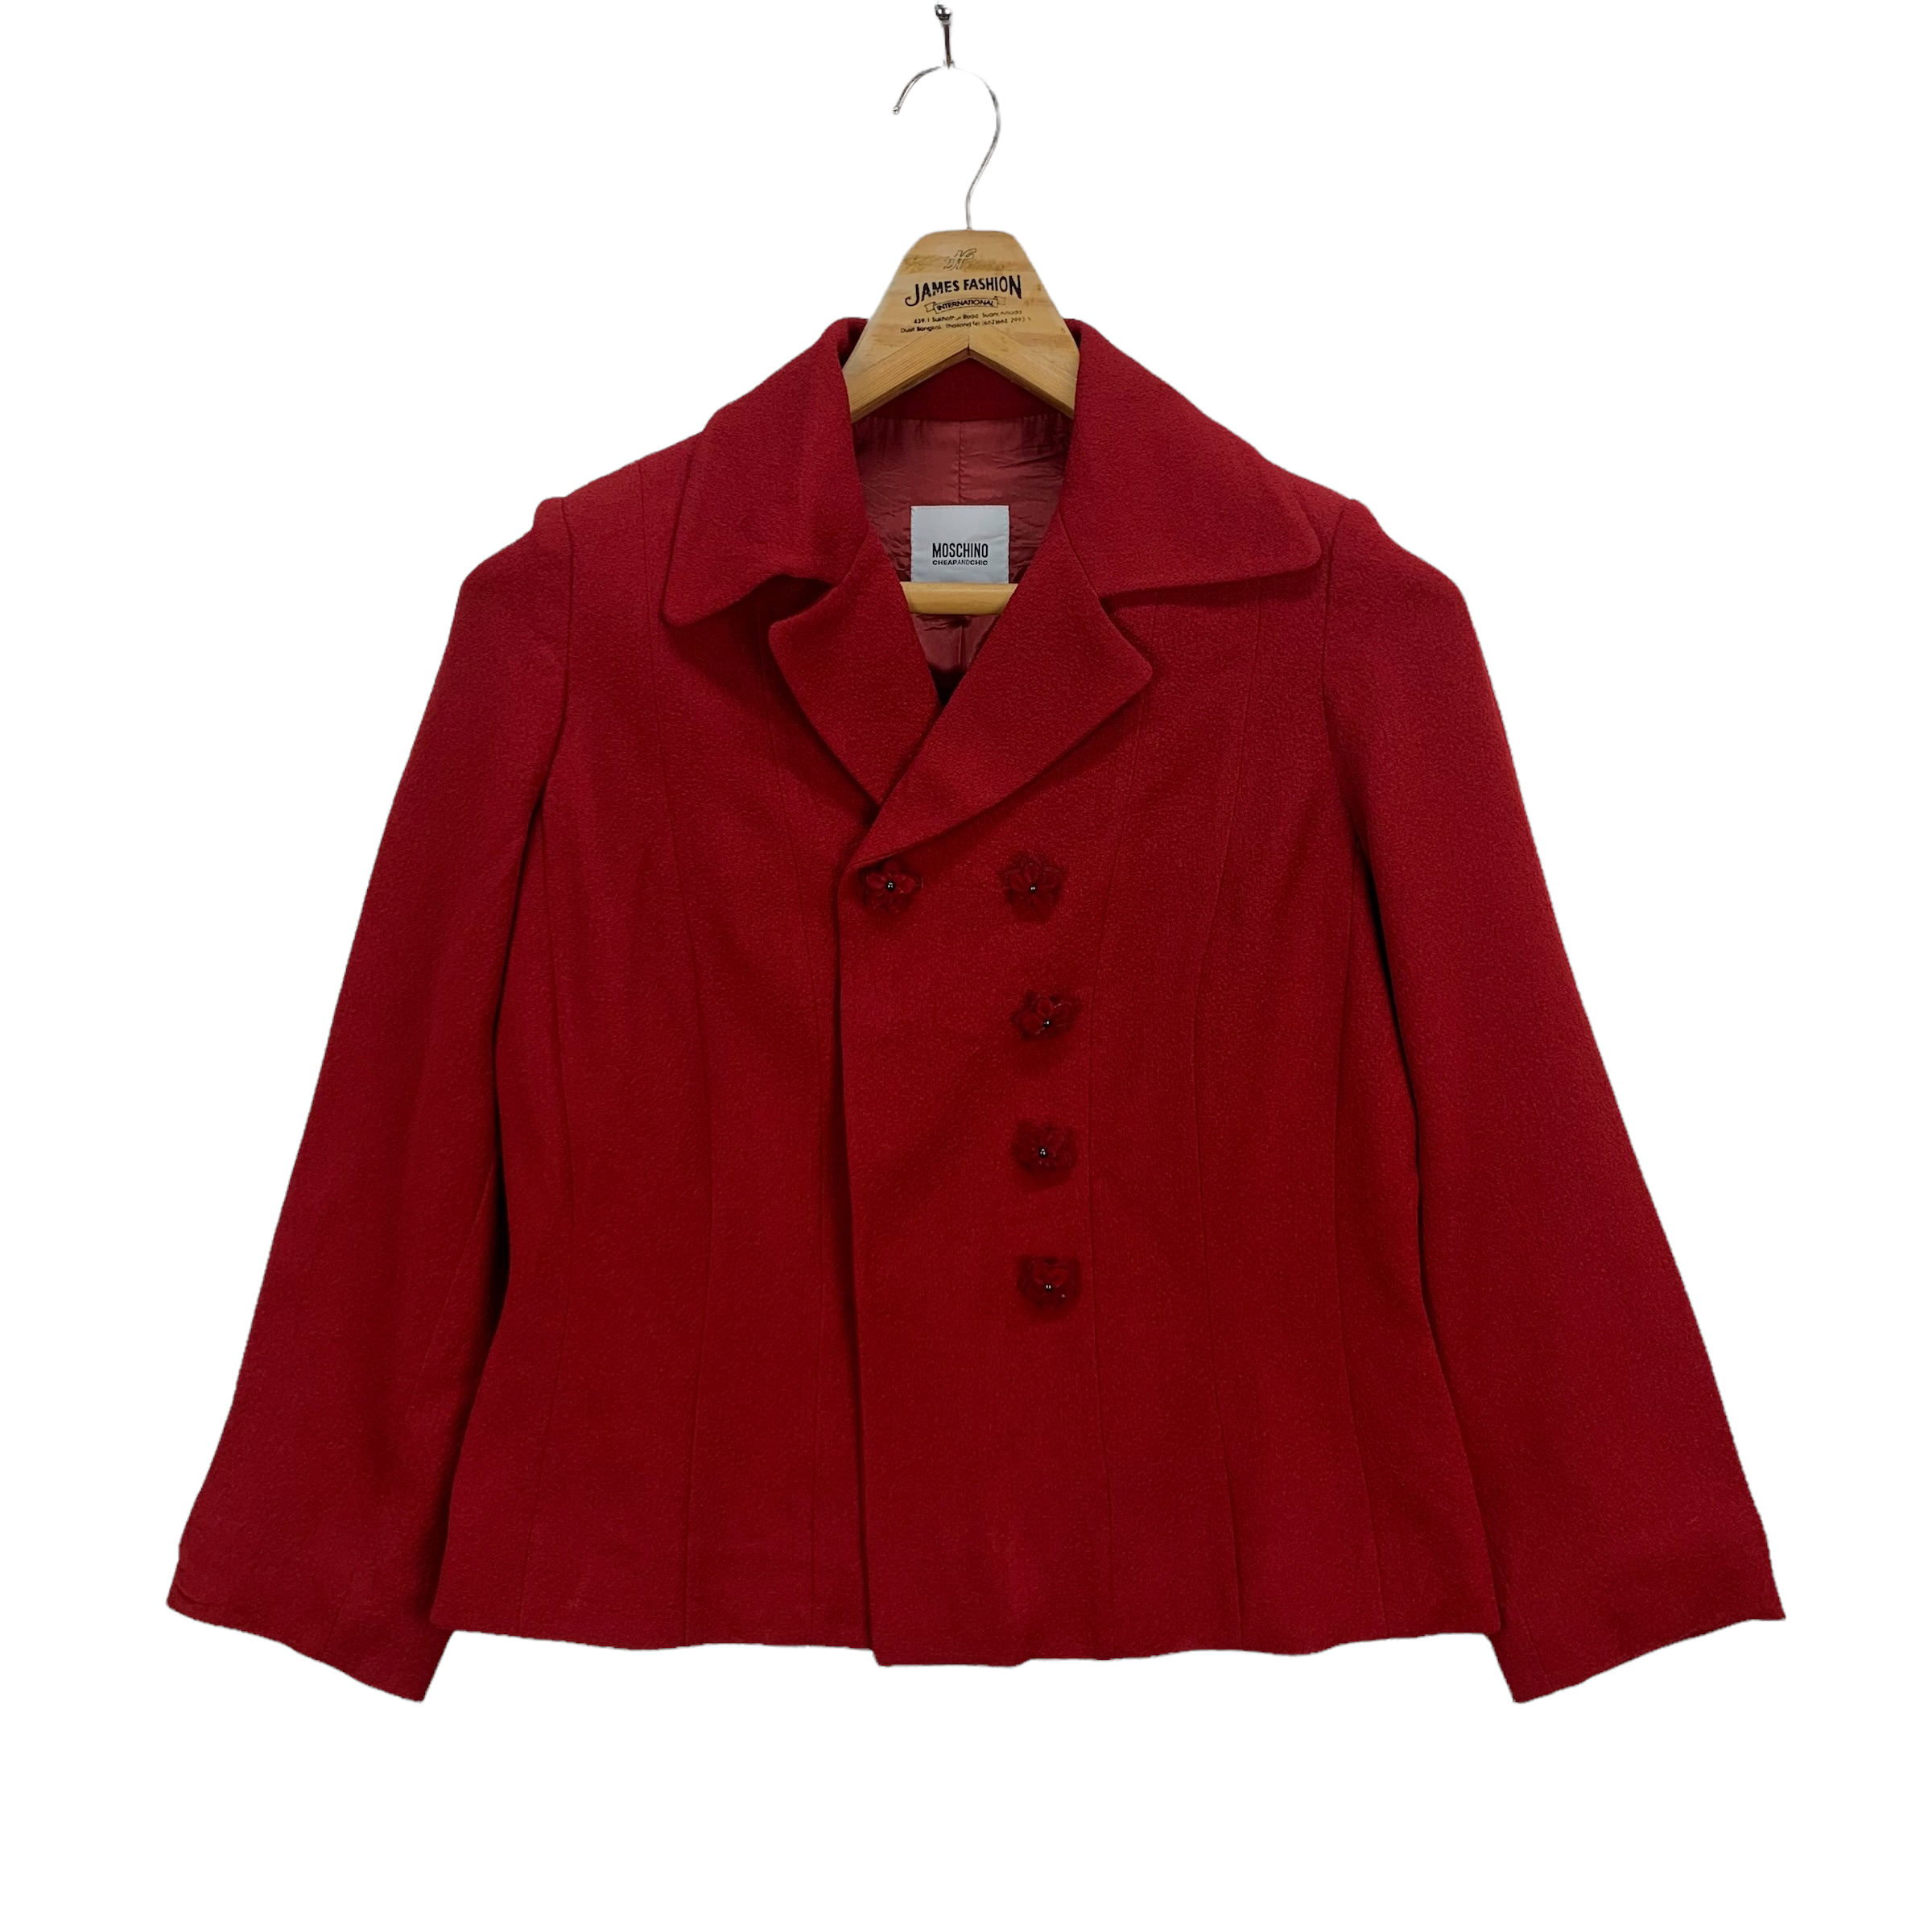 Moschino Cheap and Chic Red Double Breasted Coat #3952-137 - 4